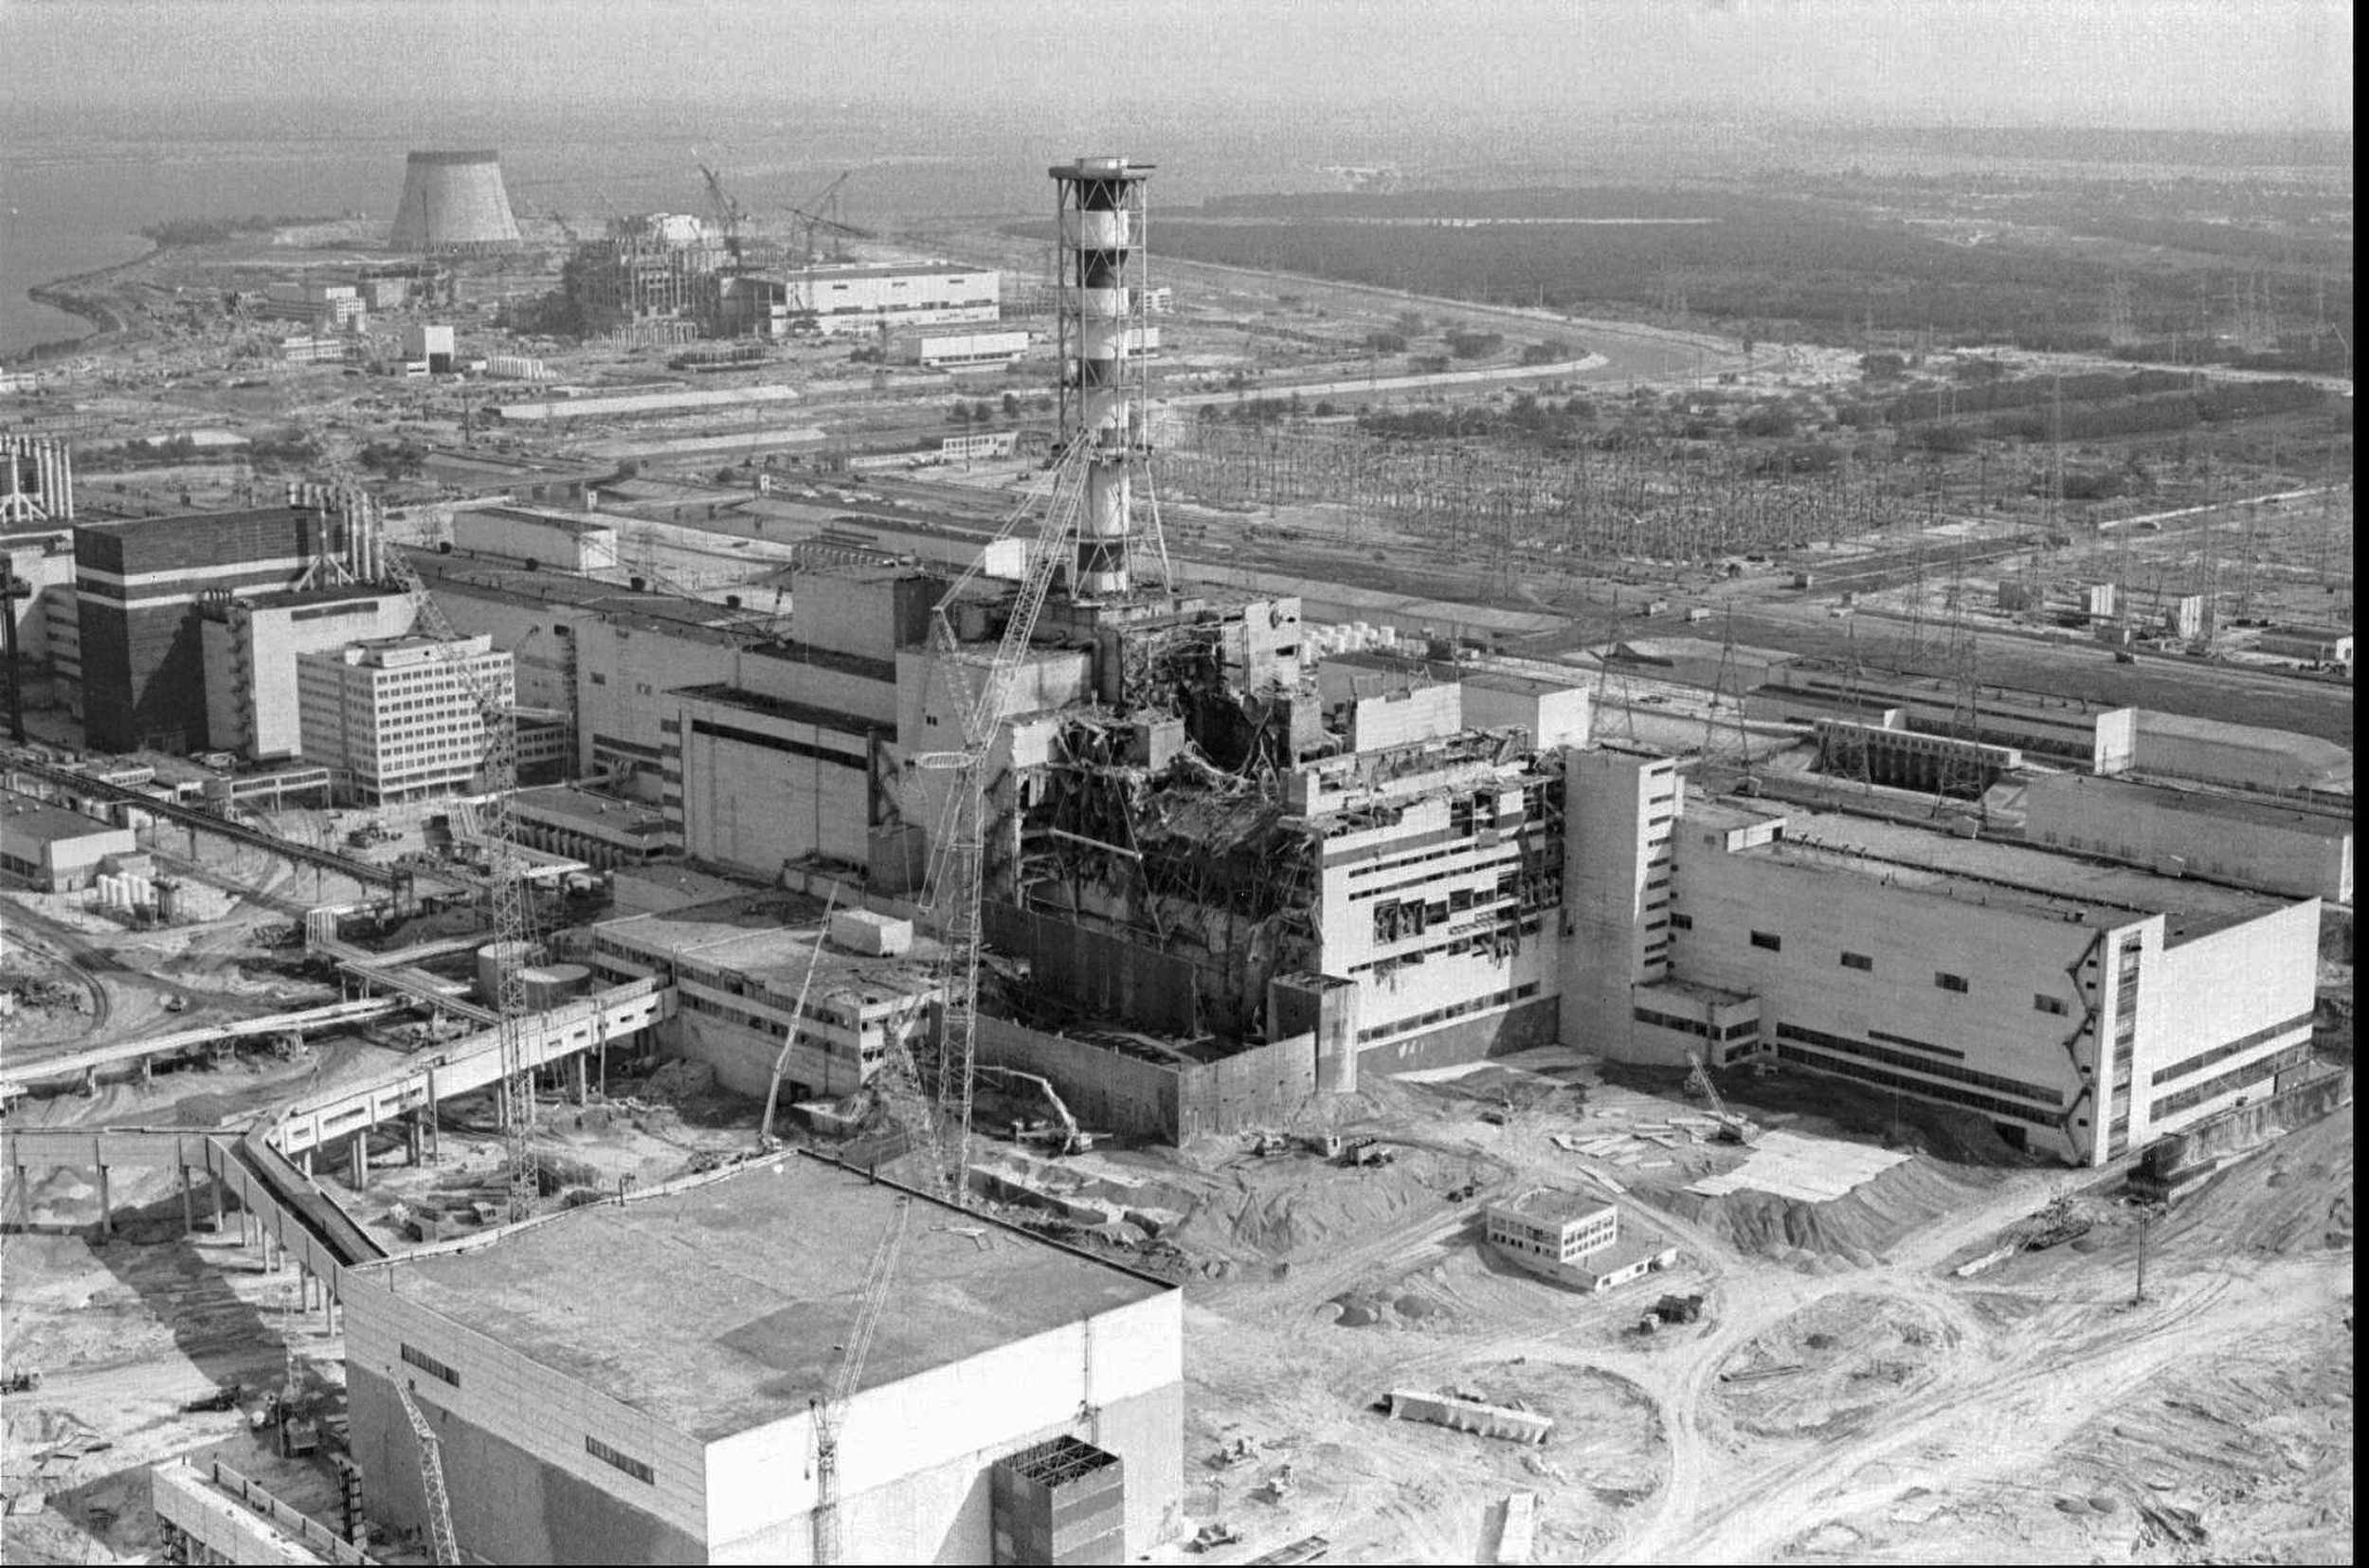 37 years since Chernobyl nuclear disaster shocked the world